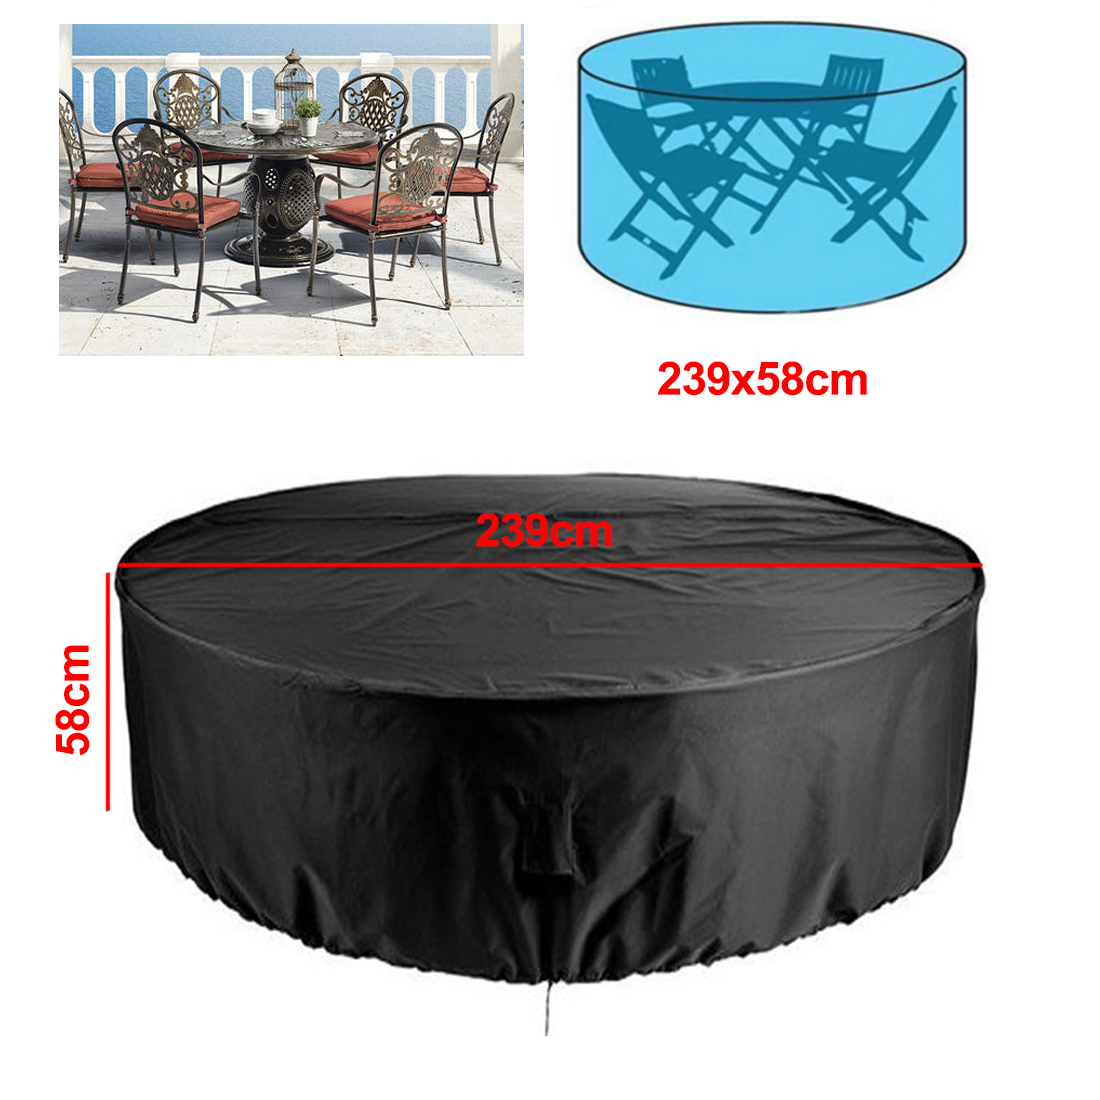 Furniture Cover Round Table Chair Set Water & dust proof